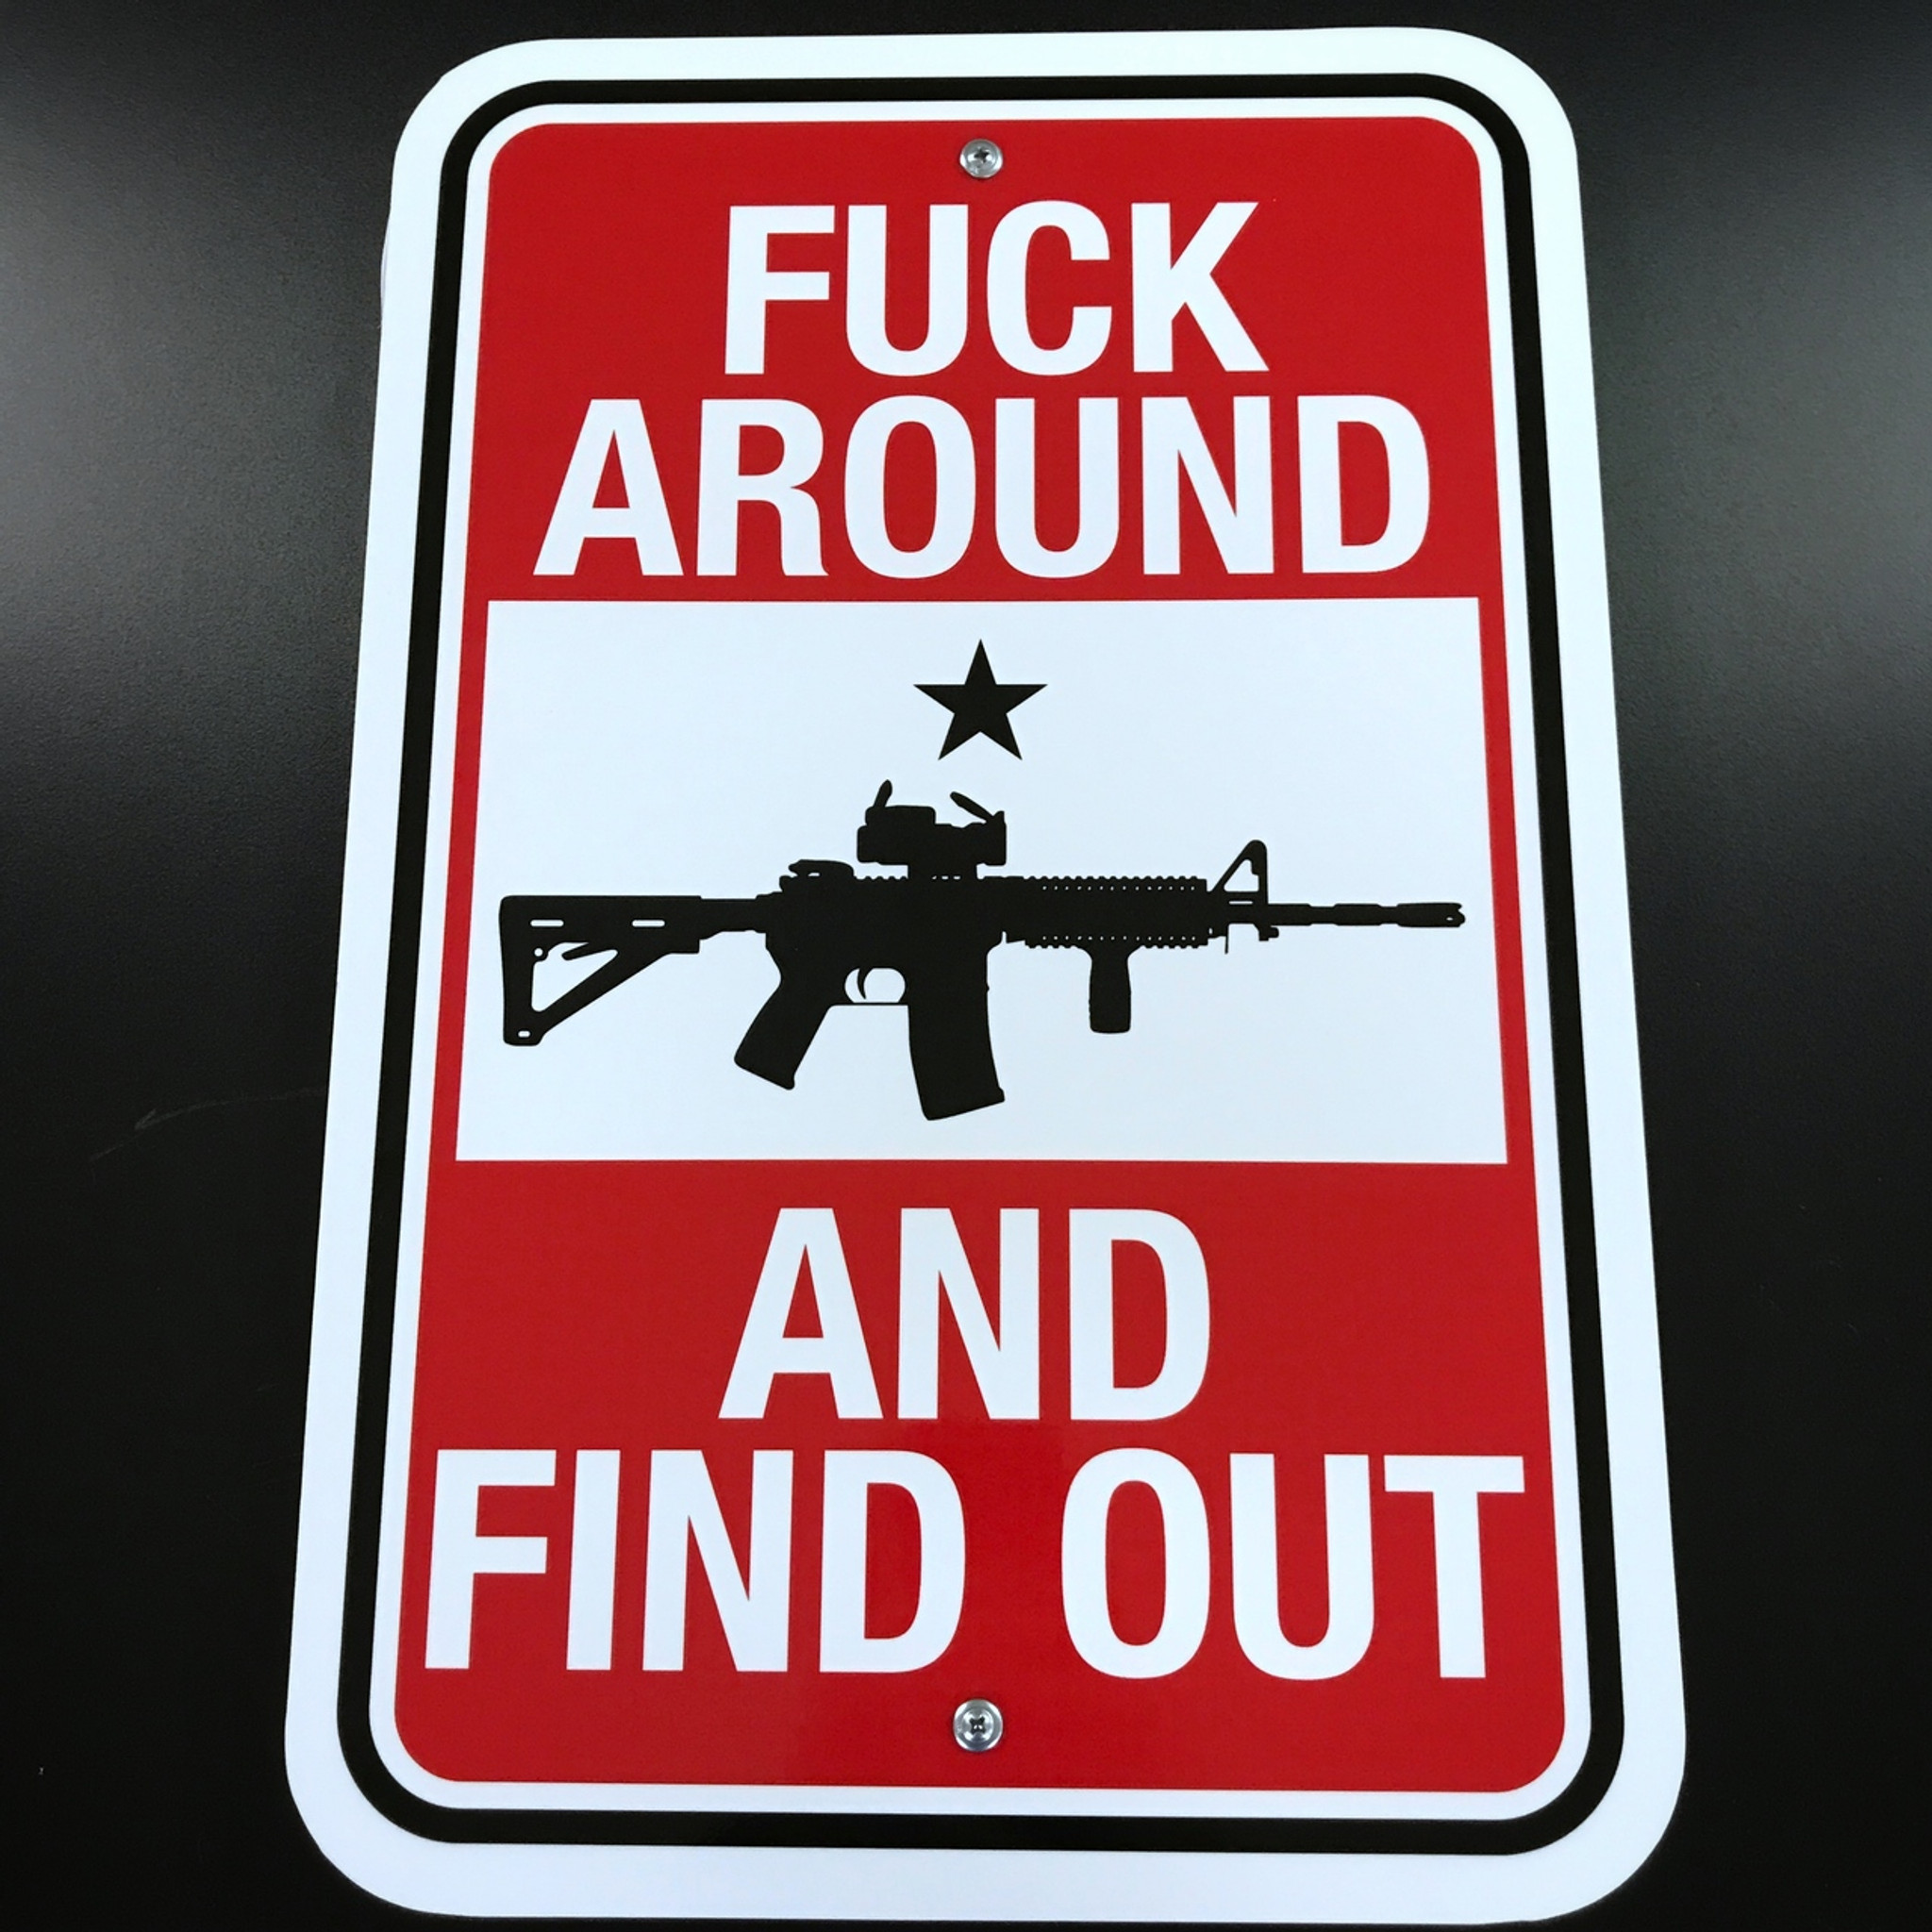 Fuck Around And Find Out 12 x 18 - Metal Sign